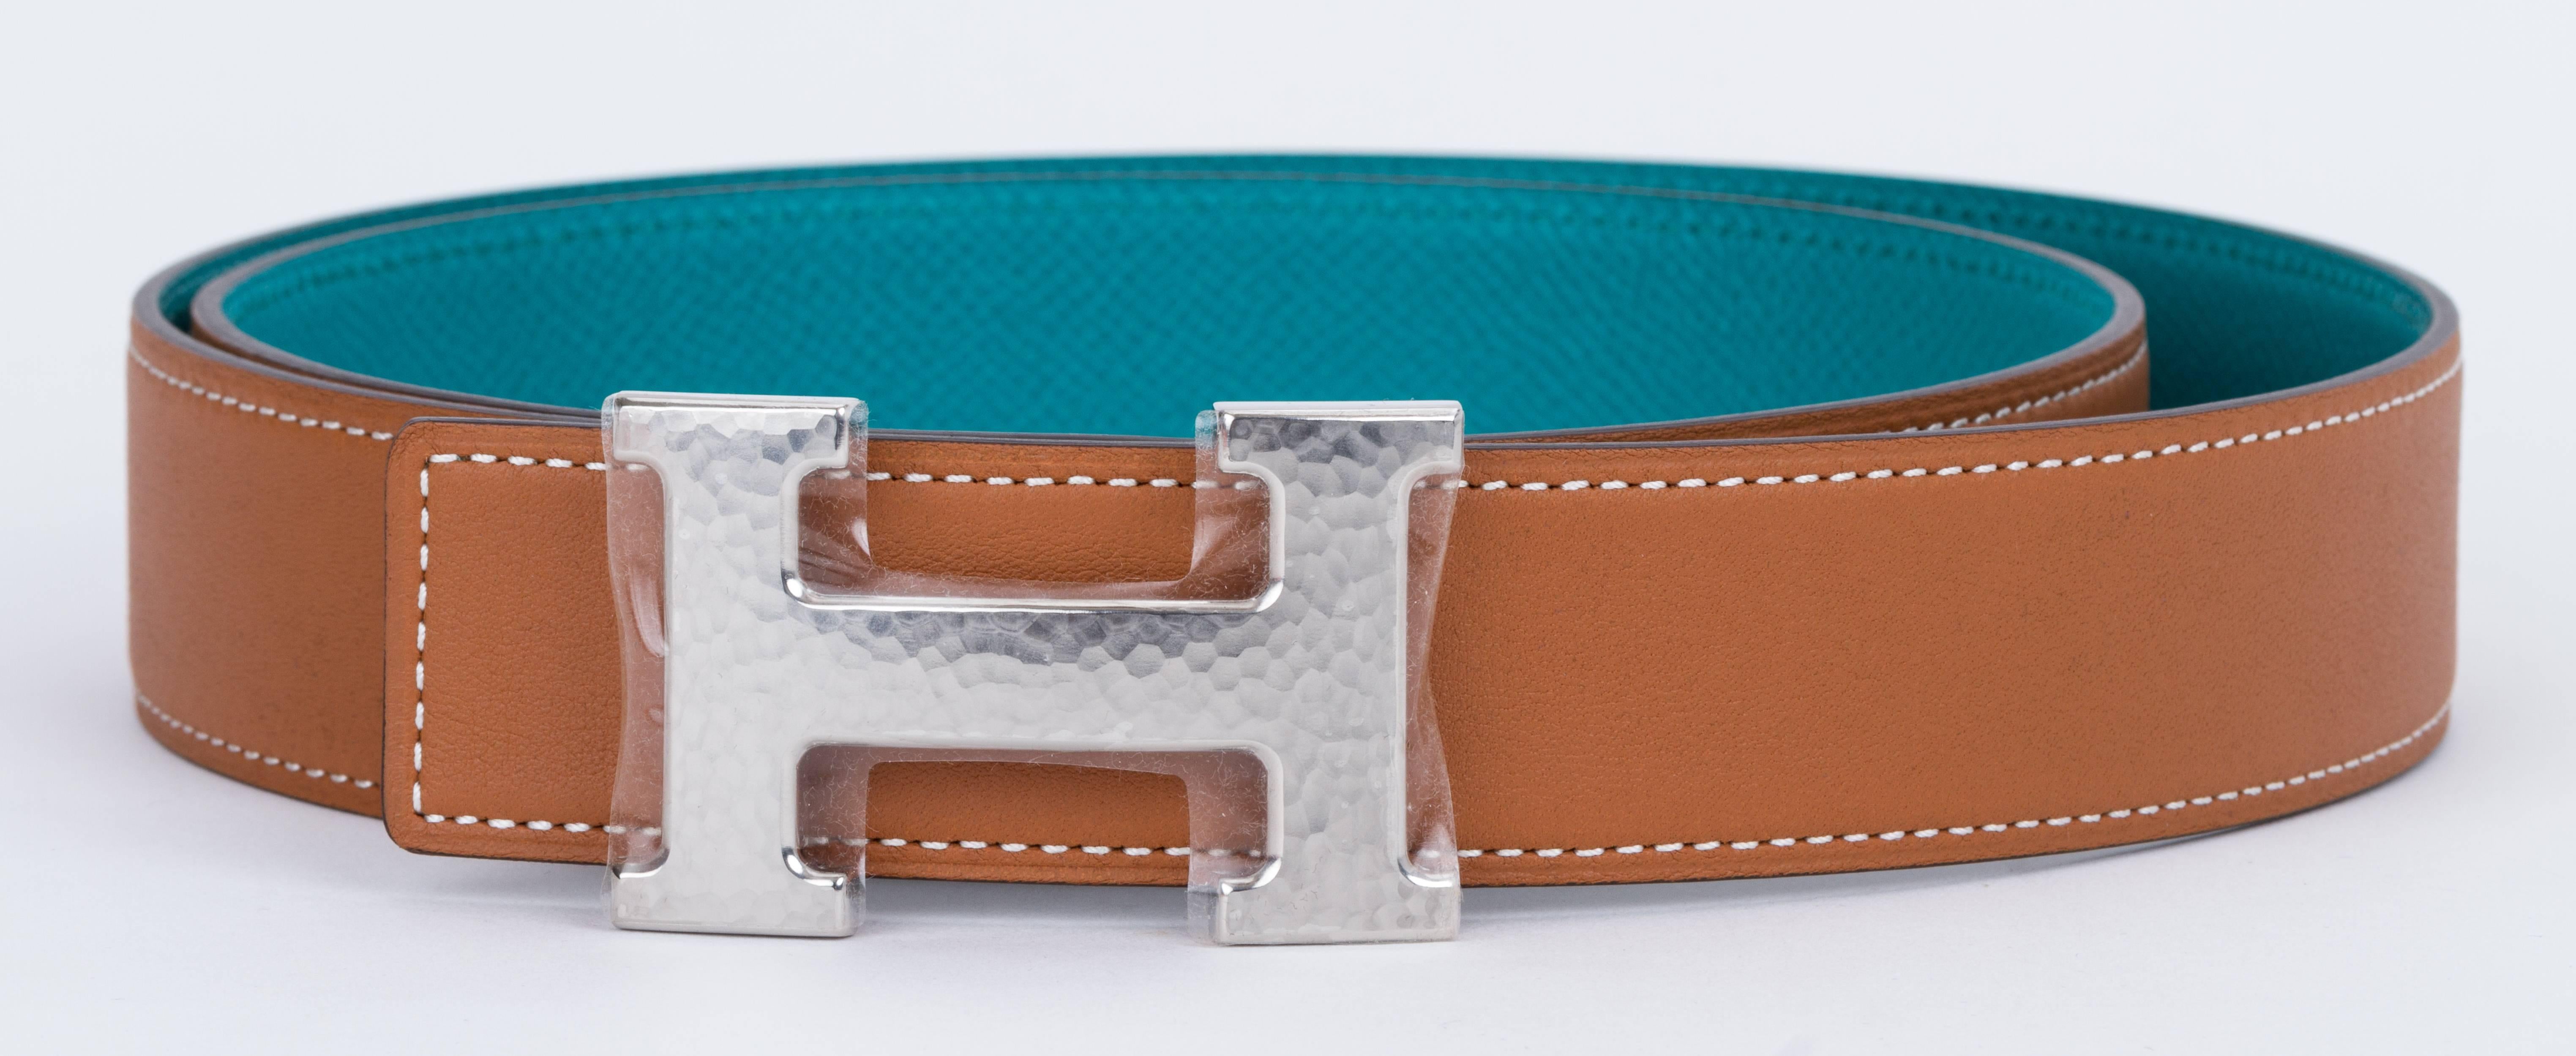 Hermes brand new in box reversible unisex h belt. Gold swift leather and blue pain epsom leather, Palladium hammered buckle. European size 95cm. Date stamp X for 2016. Comes with dust cover, box, ribbon and shopping bag.